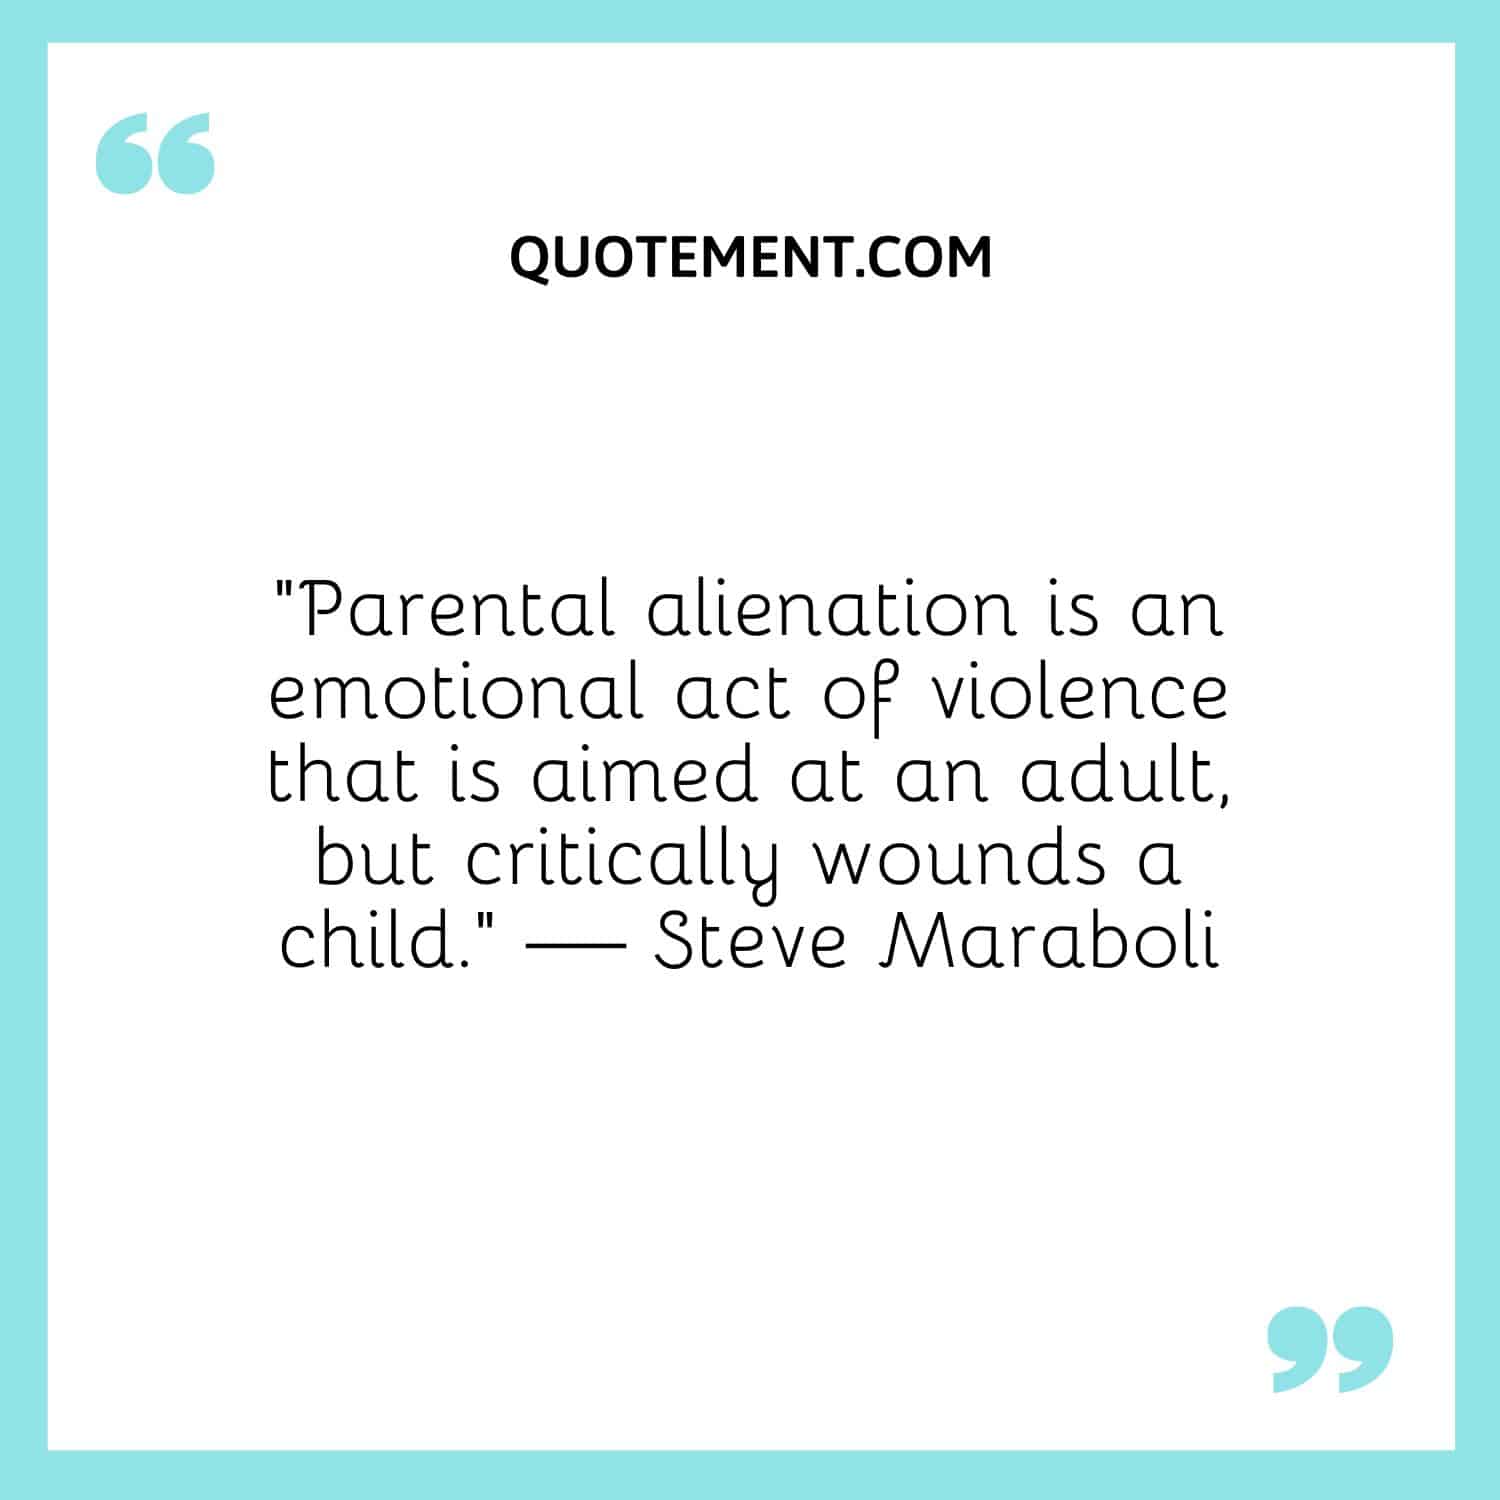 Parental alienation is an emotional act of violence that is aimed at an adult, but critically wounds a child